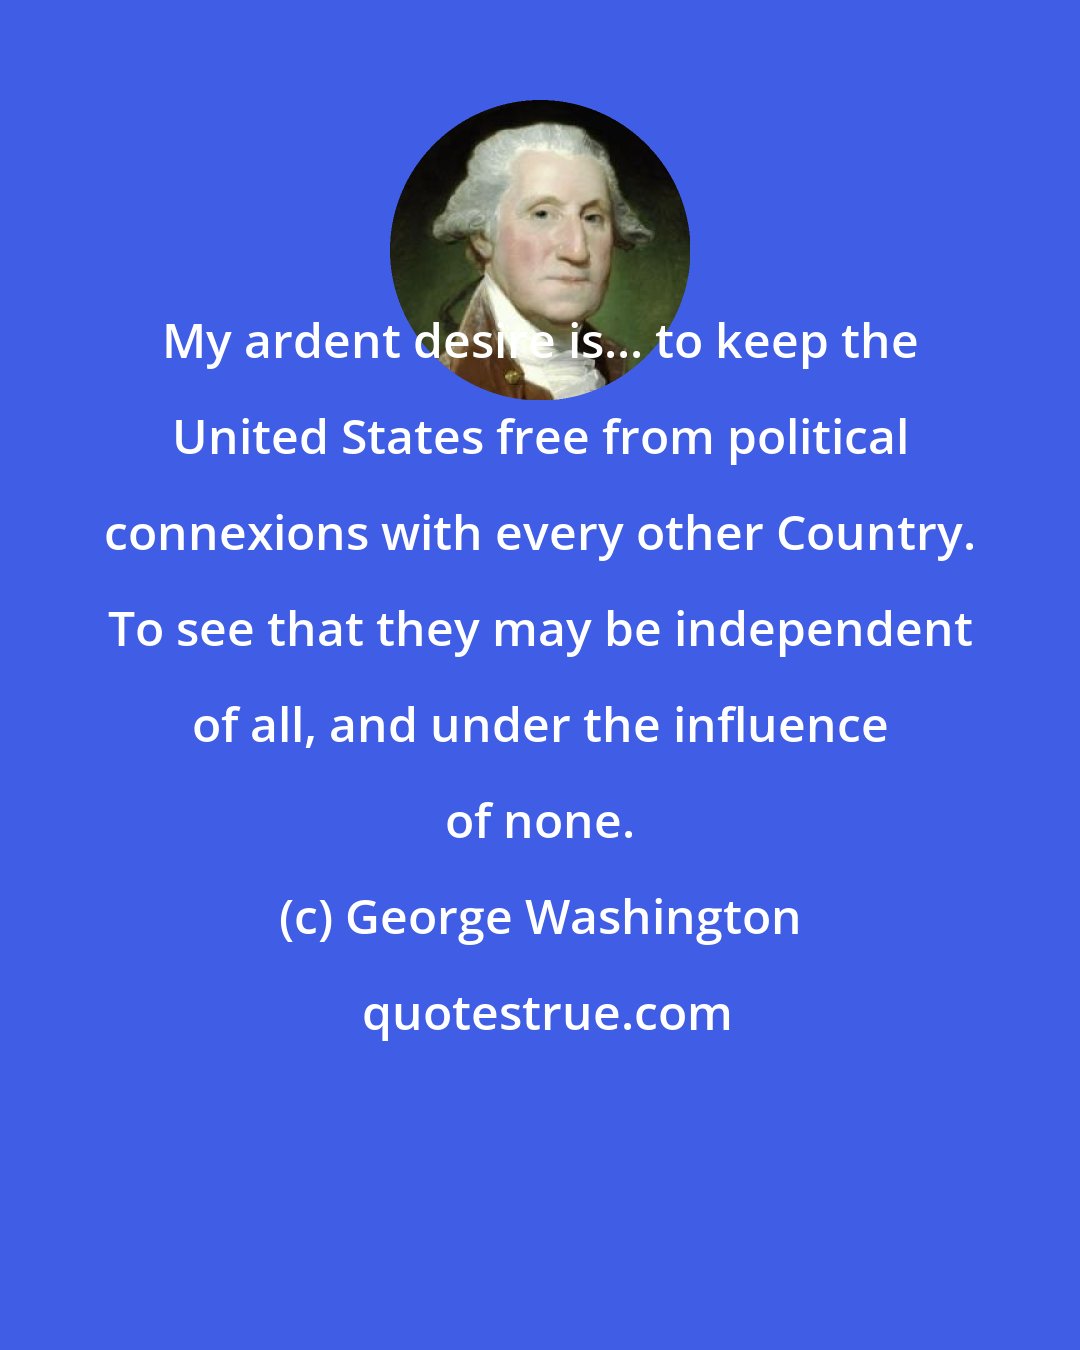 George Washington: My ardent desire is... to keep the United States free from political connexions with every other Country. To see that they may be independent of all, and under the influence of none.